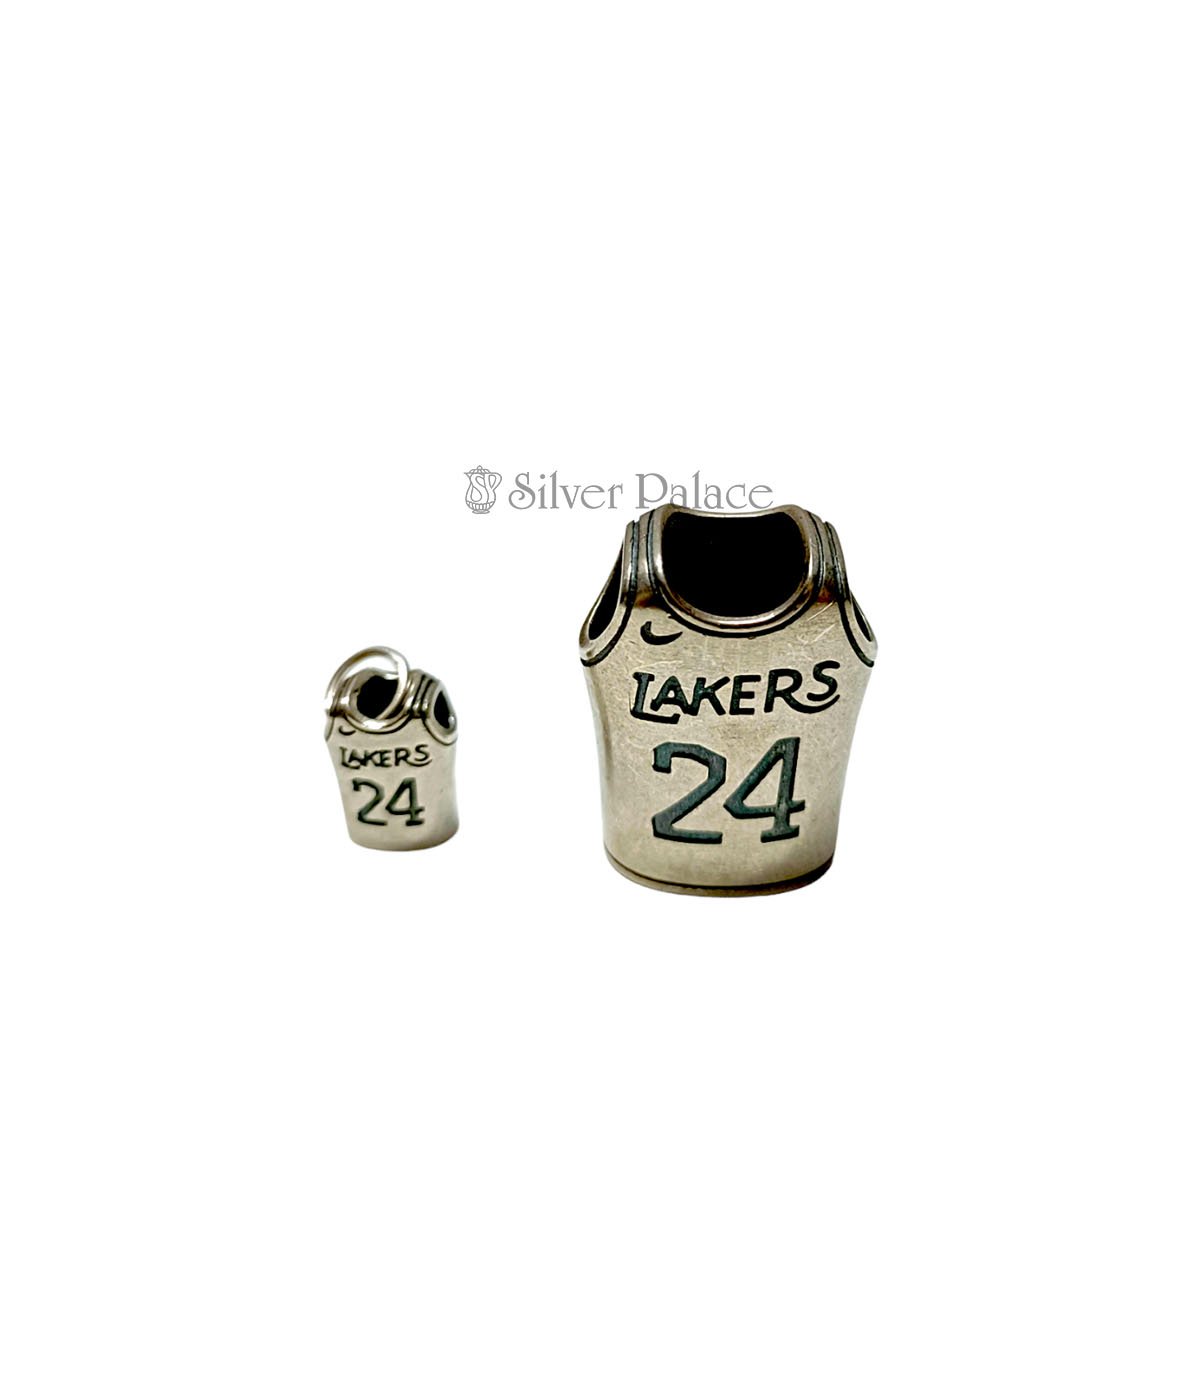 STERLING SILVER LAKERS JERSEY PENDANT